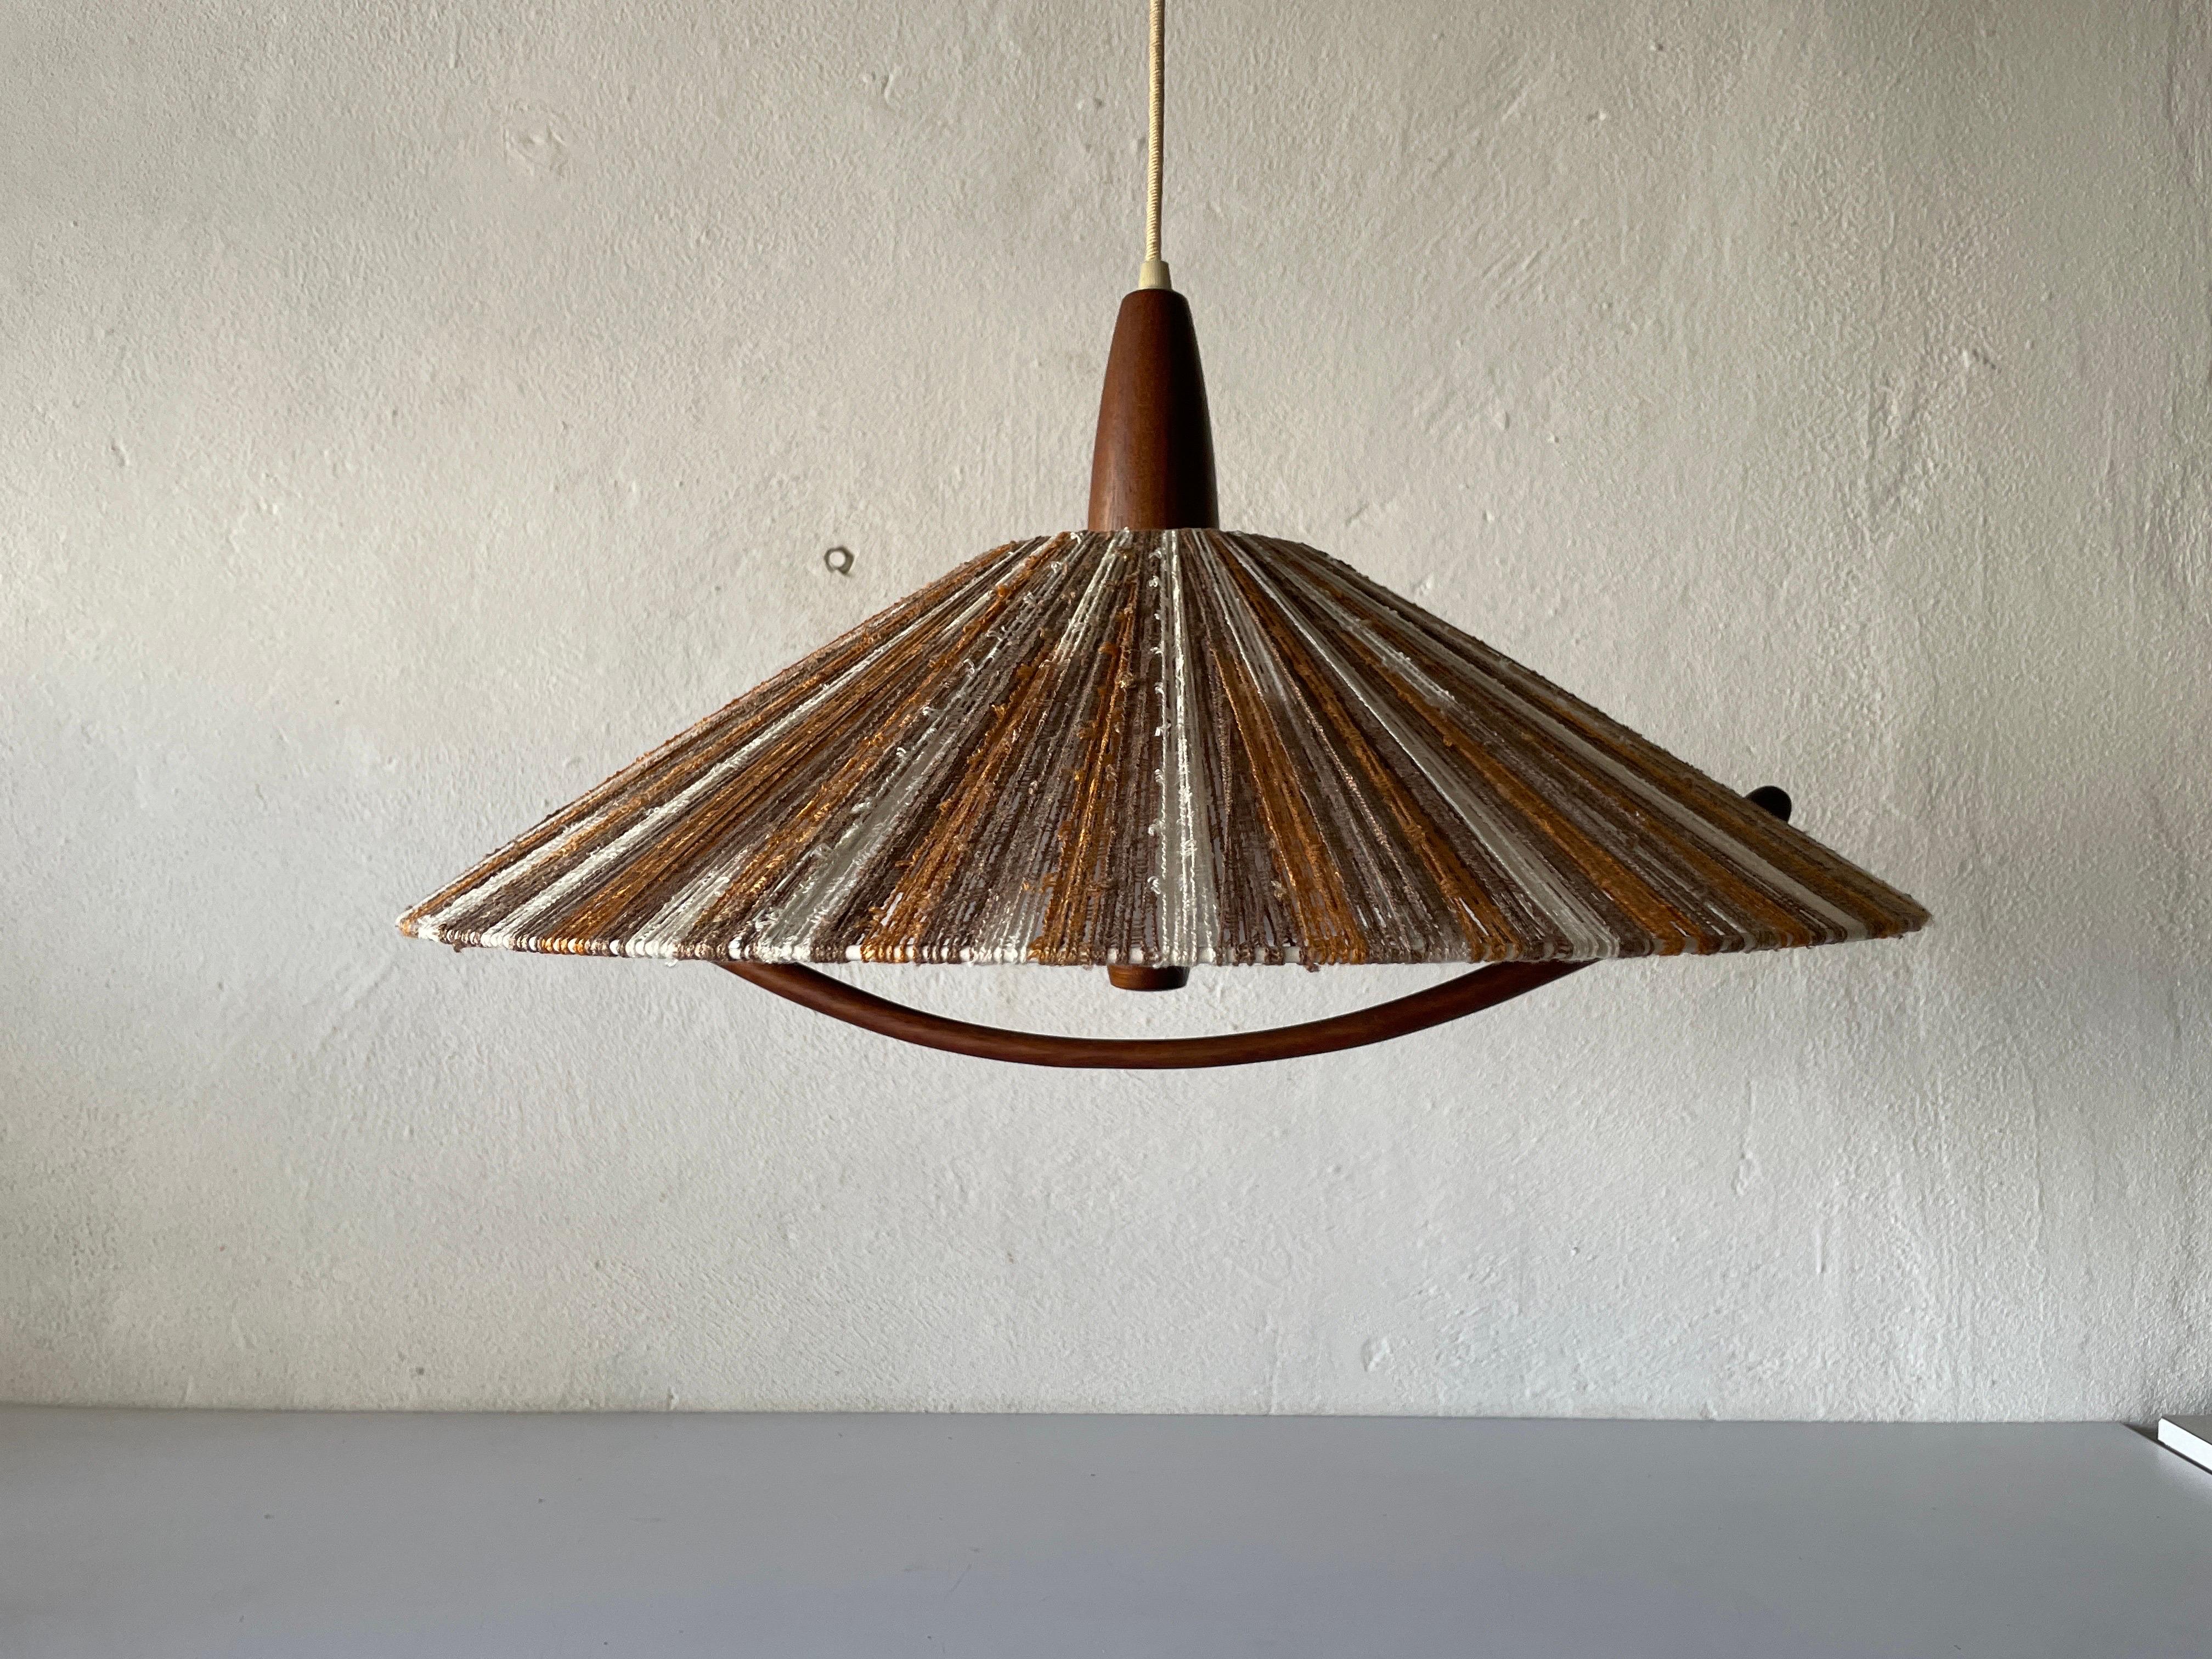 Colorful raffia bast and teak pendant Llamp by Temde, 1960s, Germany.

Lampshade is in very good vintage condition.

This lamp works with E27 light bulb. Max 100W
Wired and suitable to use with 220V and 110V for all